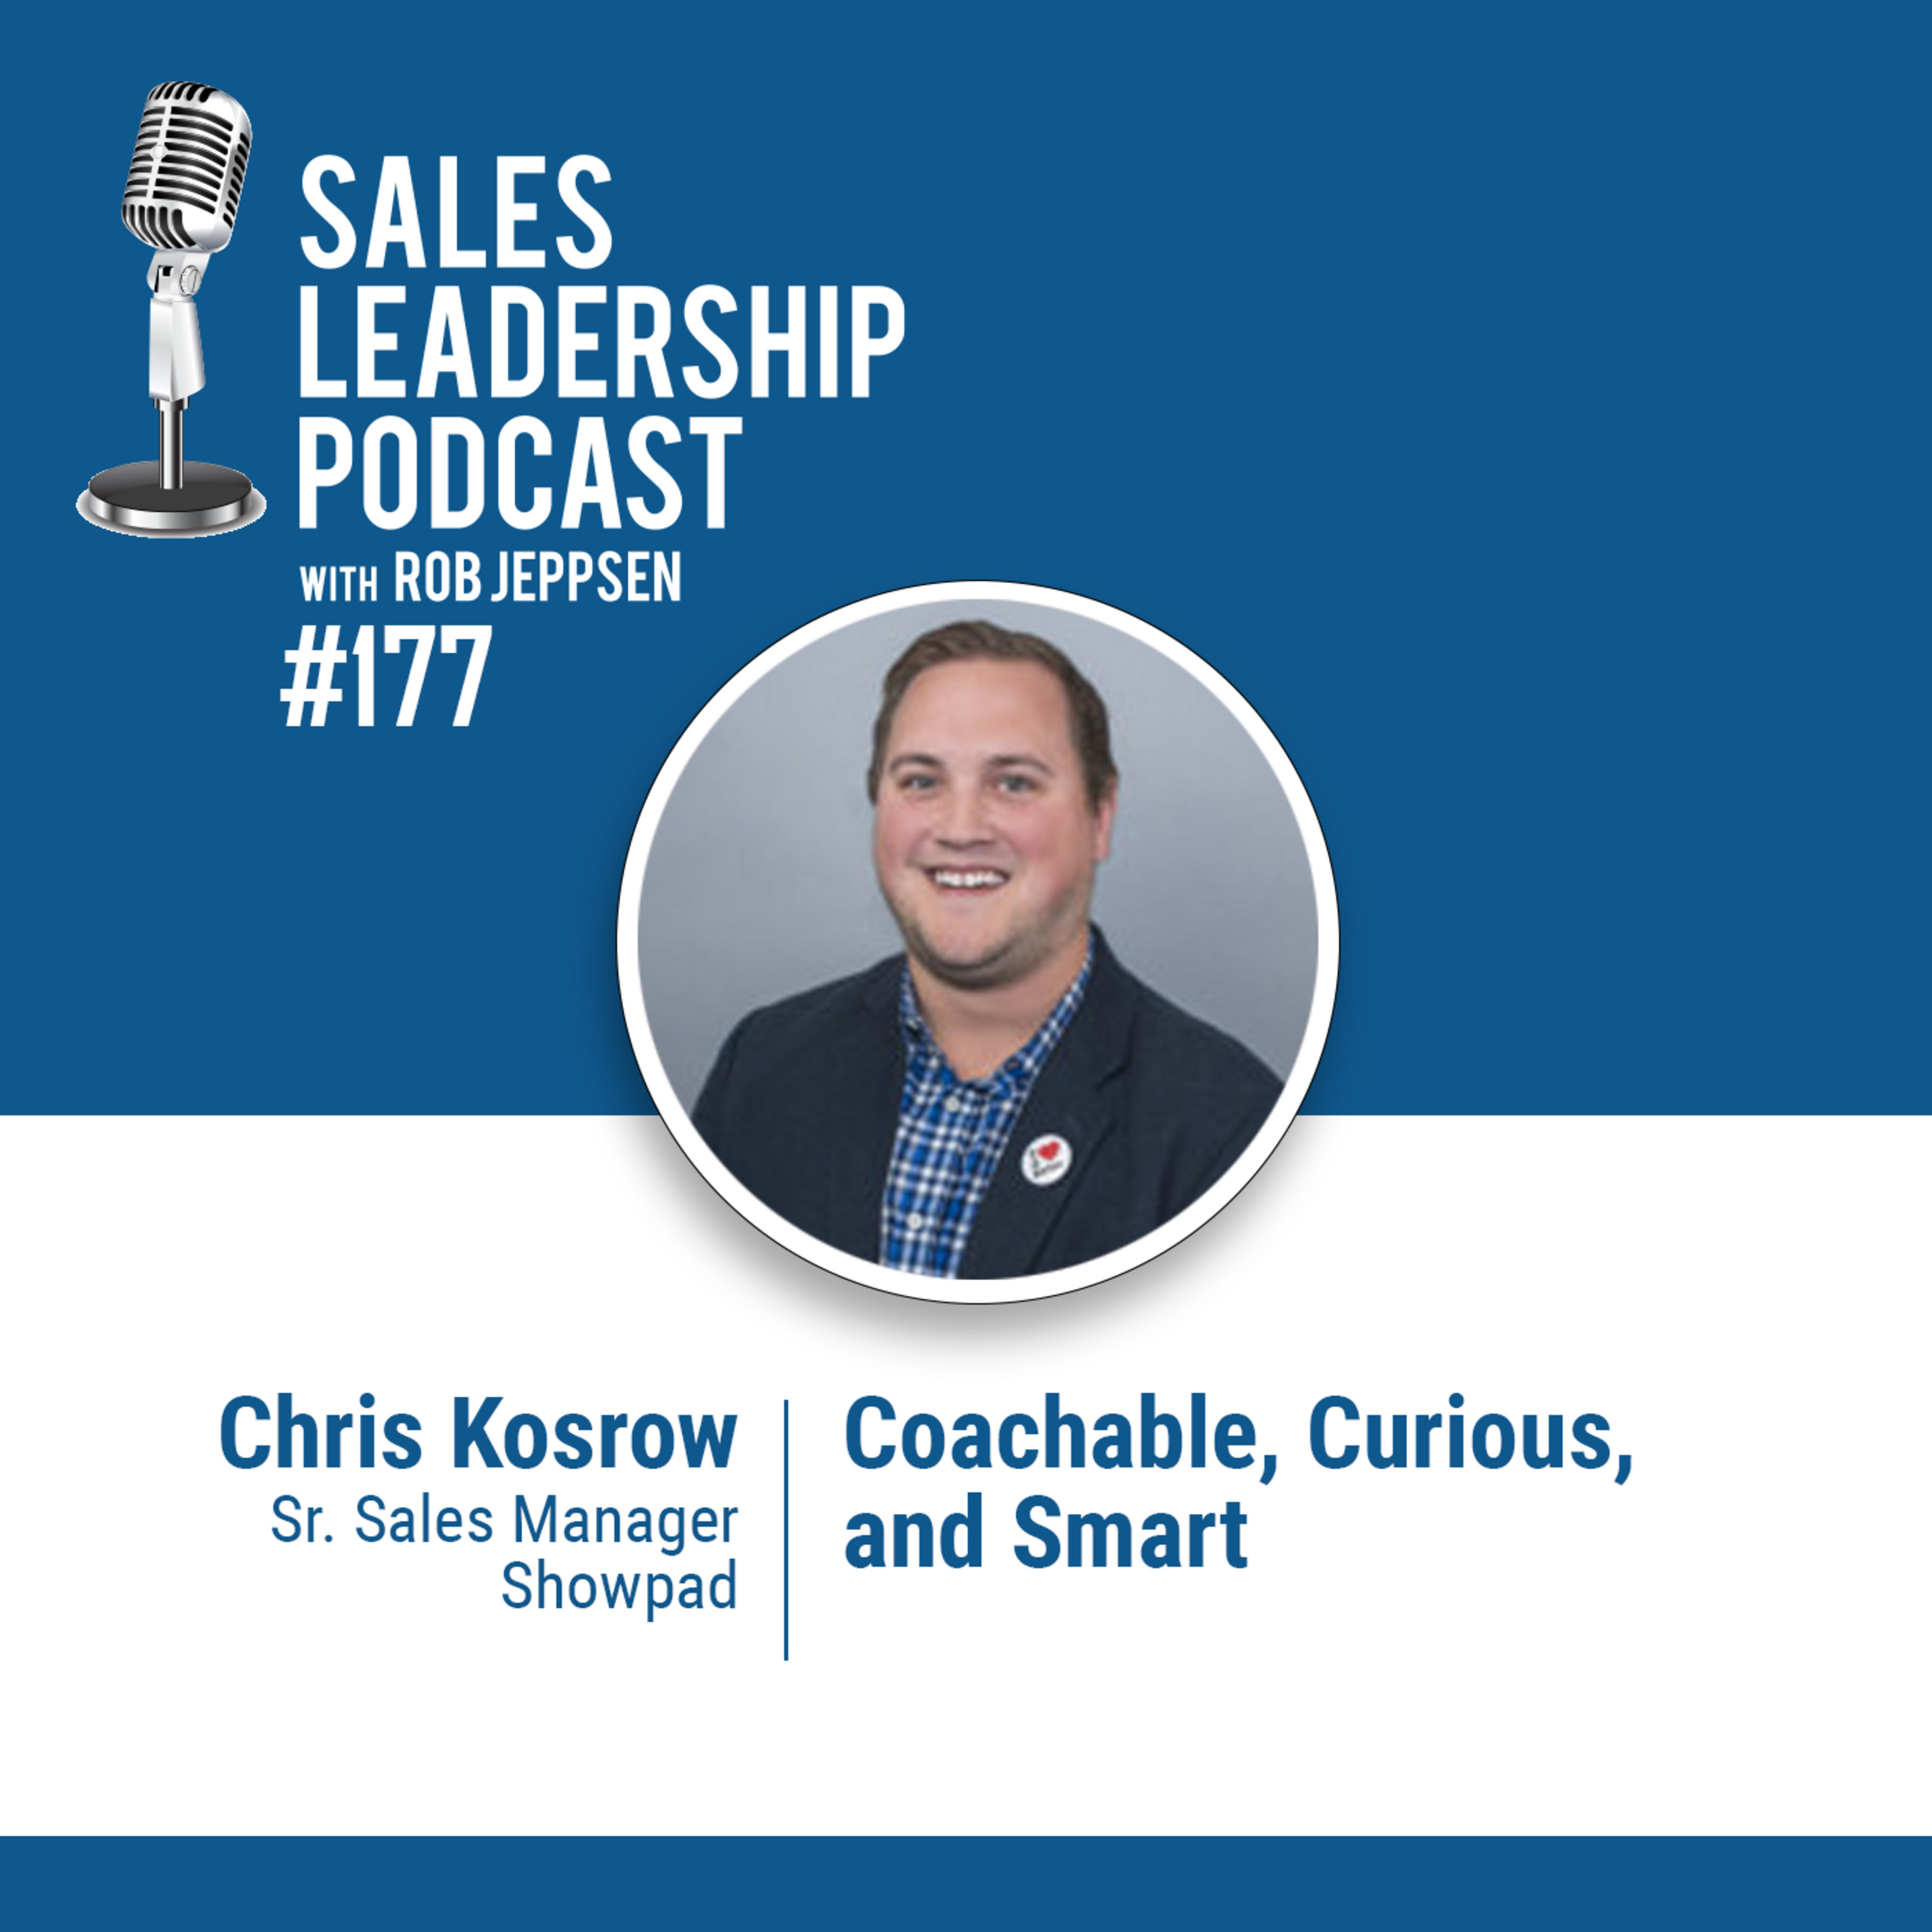 Episode 178: #177: Chris Kosrow of Showpad  — Coachable, Curious, and Smart:  How to help new sellers achieve success faster.